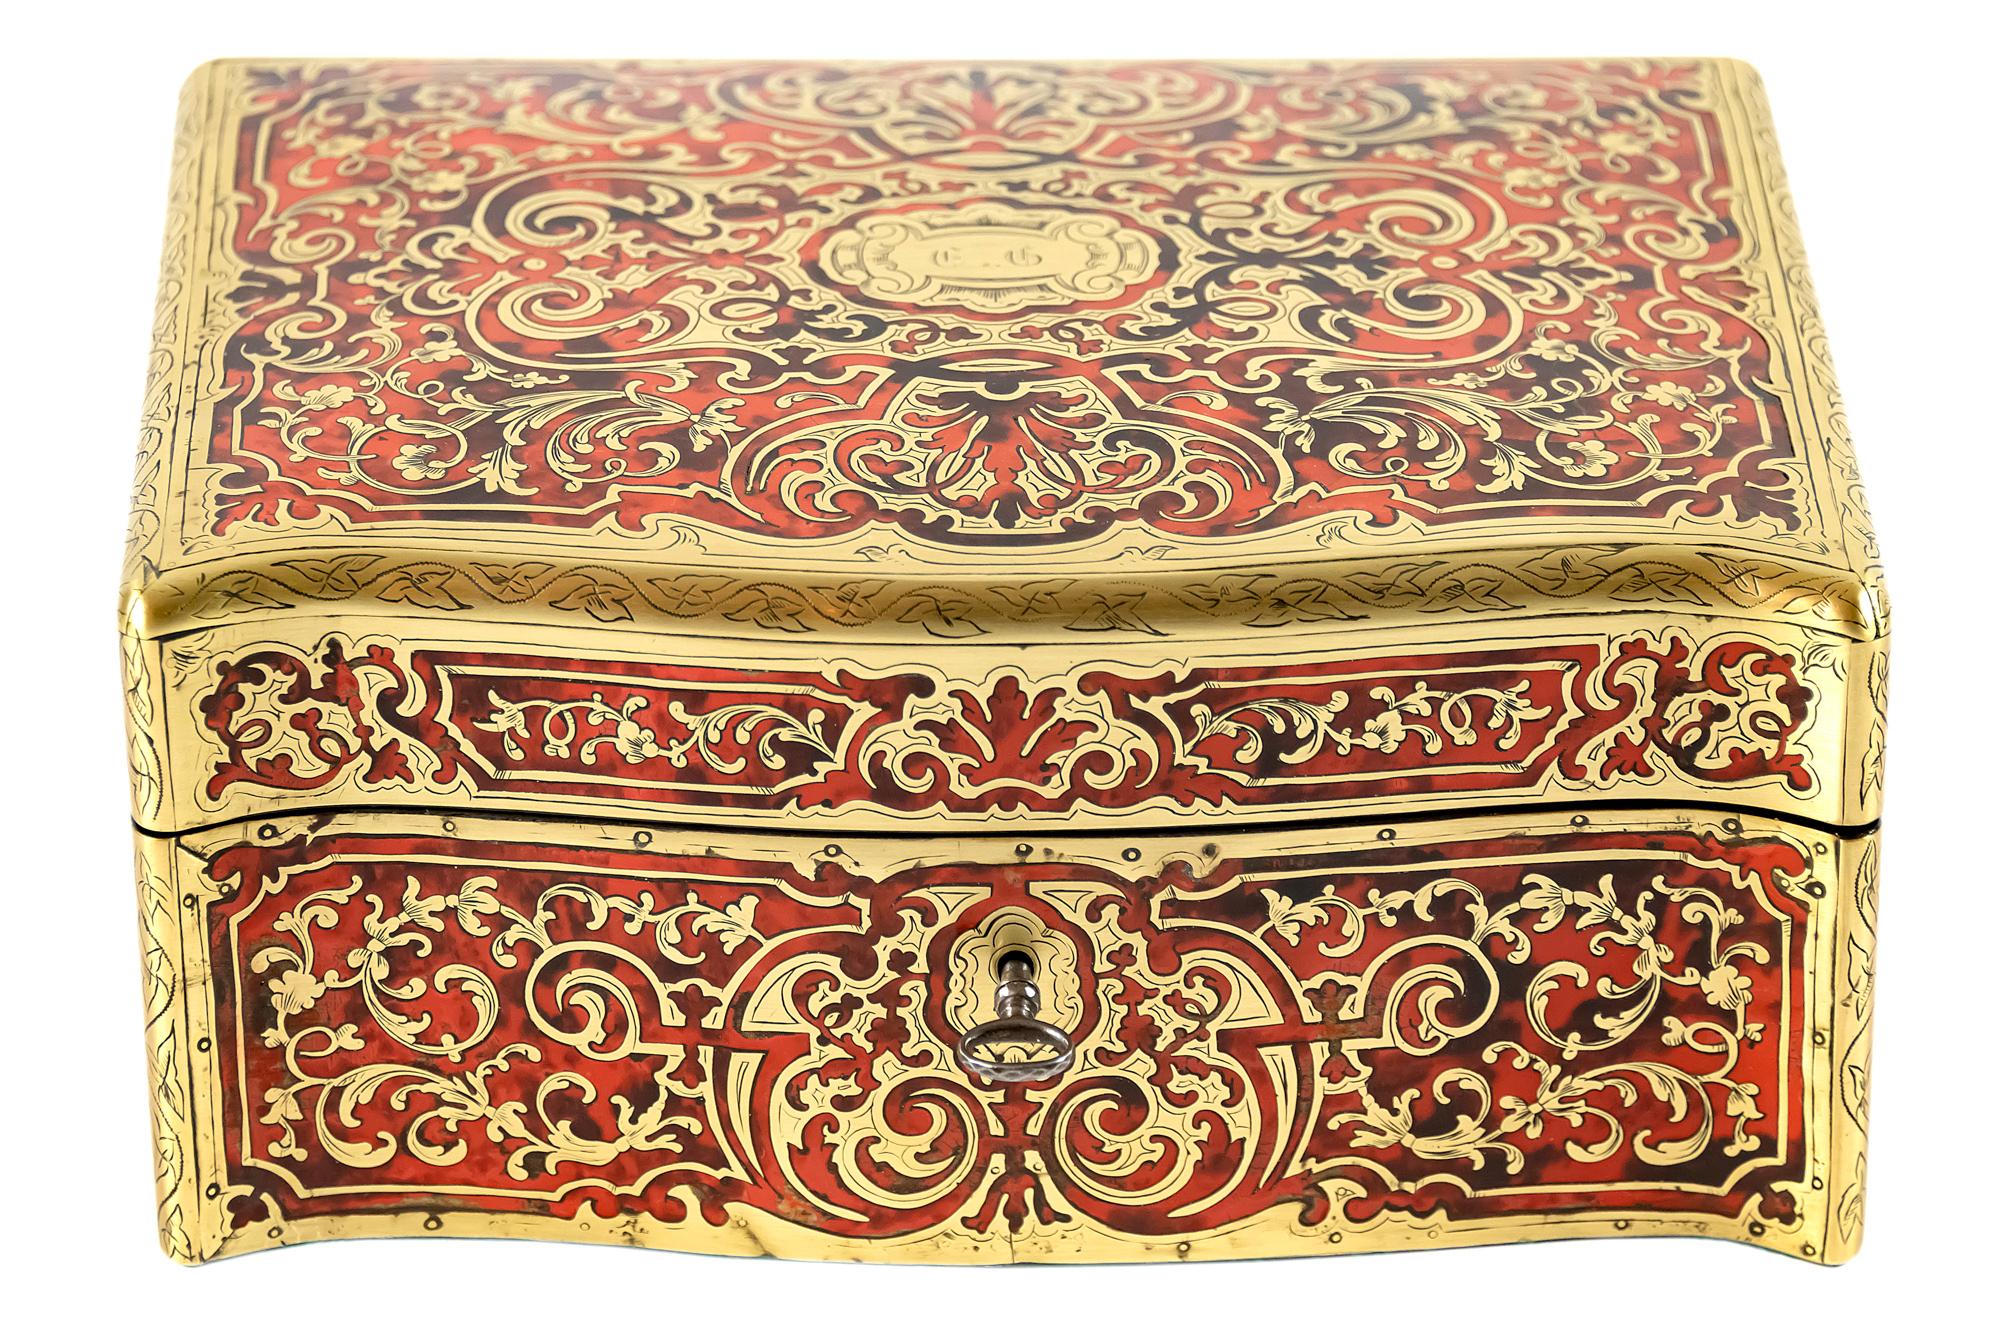 Antique 19th century French boulle marquetry box.
The wooden box is decorated with inlaid brass and tortoiseshell.
After renovation.
Excellent condition.

 